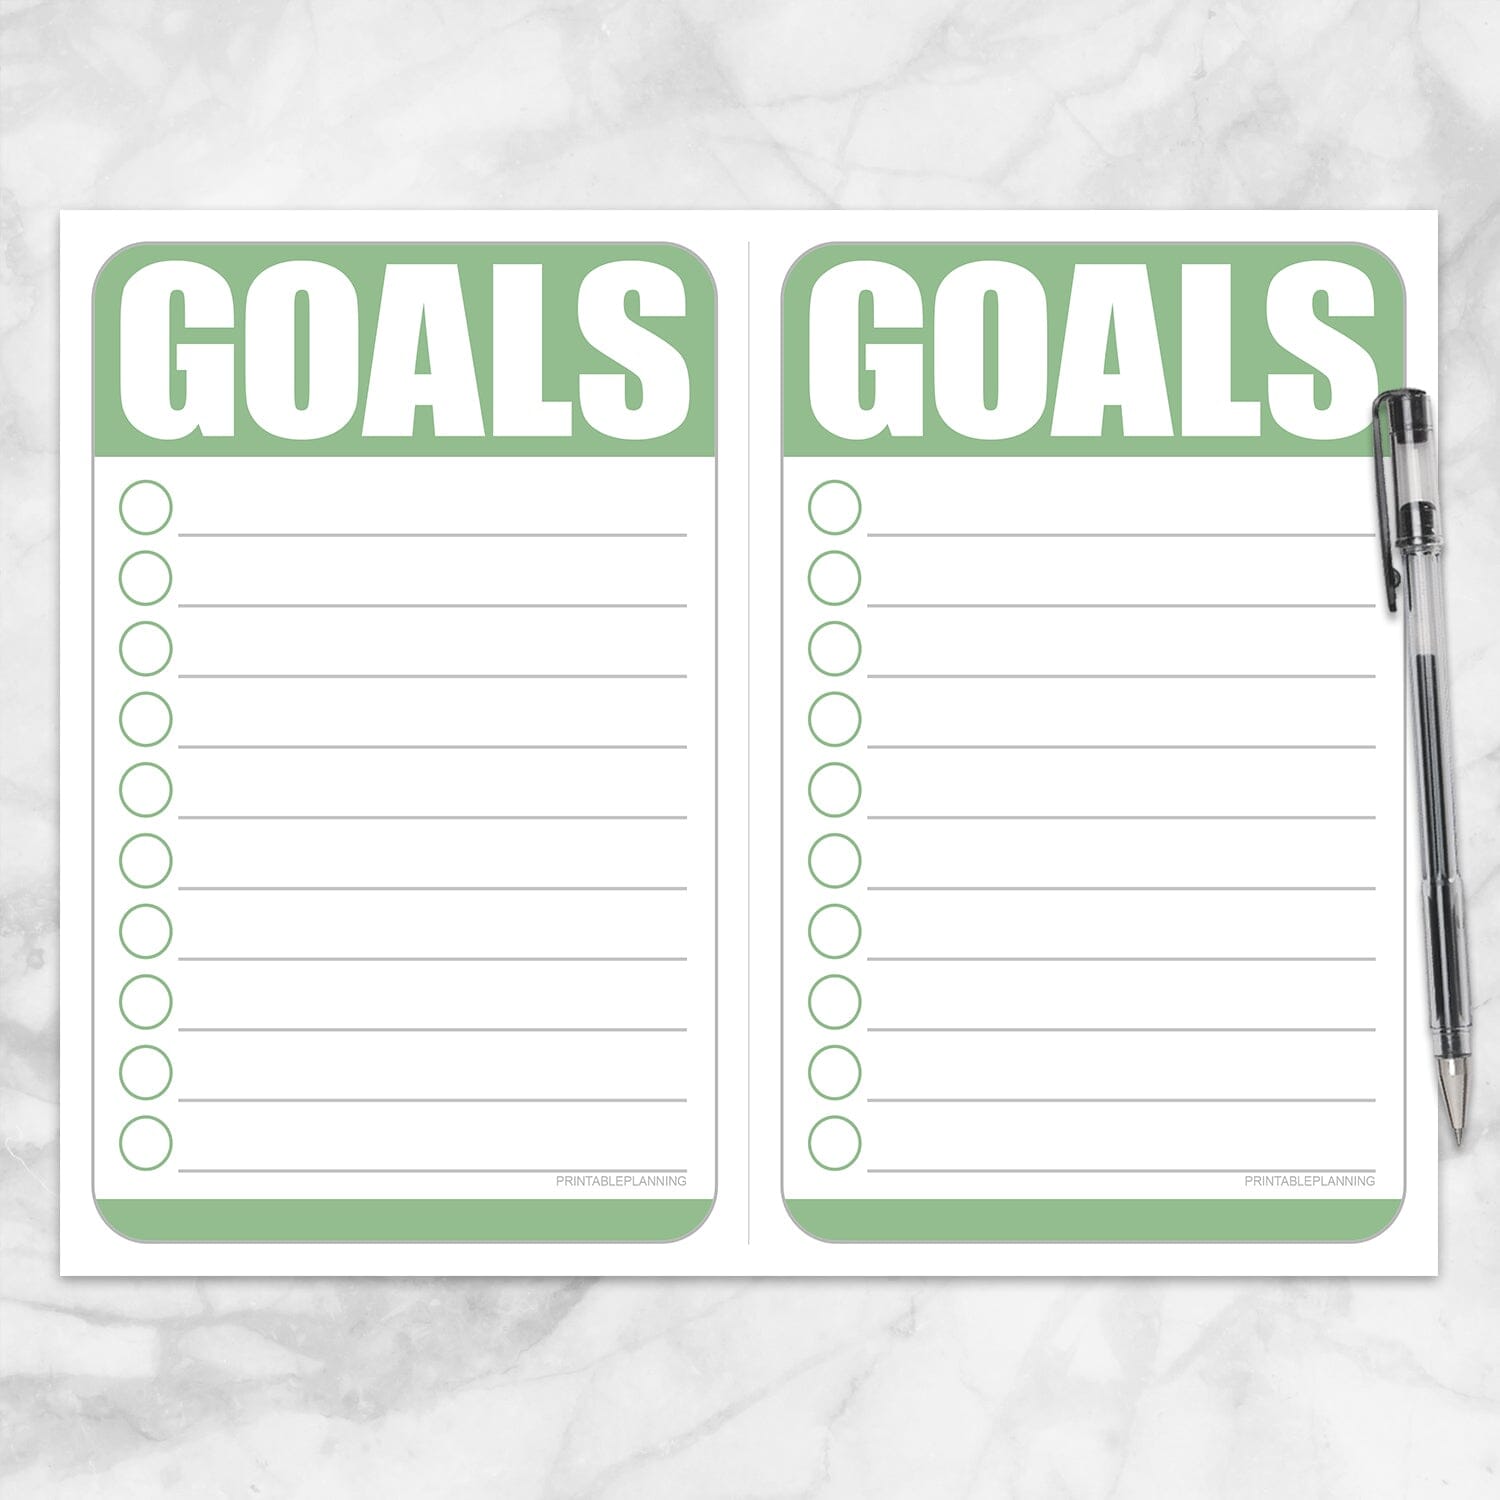 Printable Goals - two Green Half Page Checklists per sheet at Printable Planning.